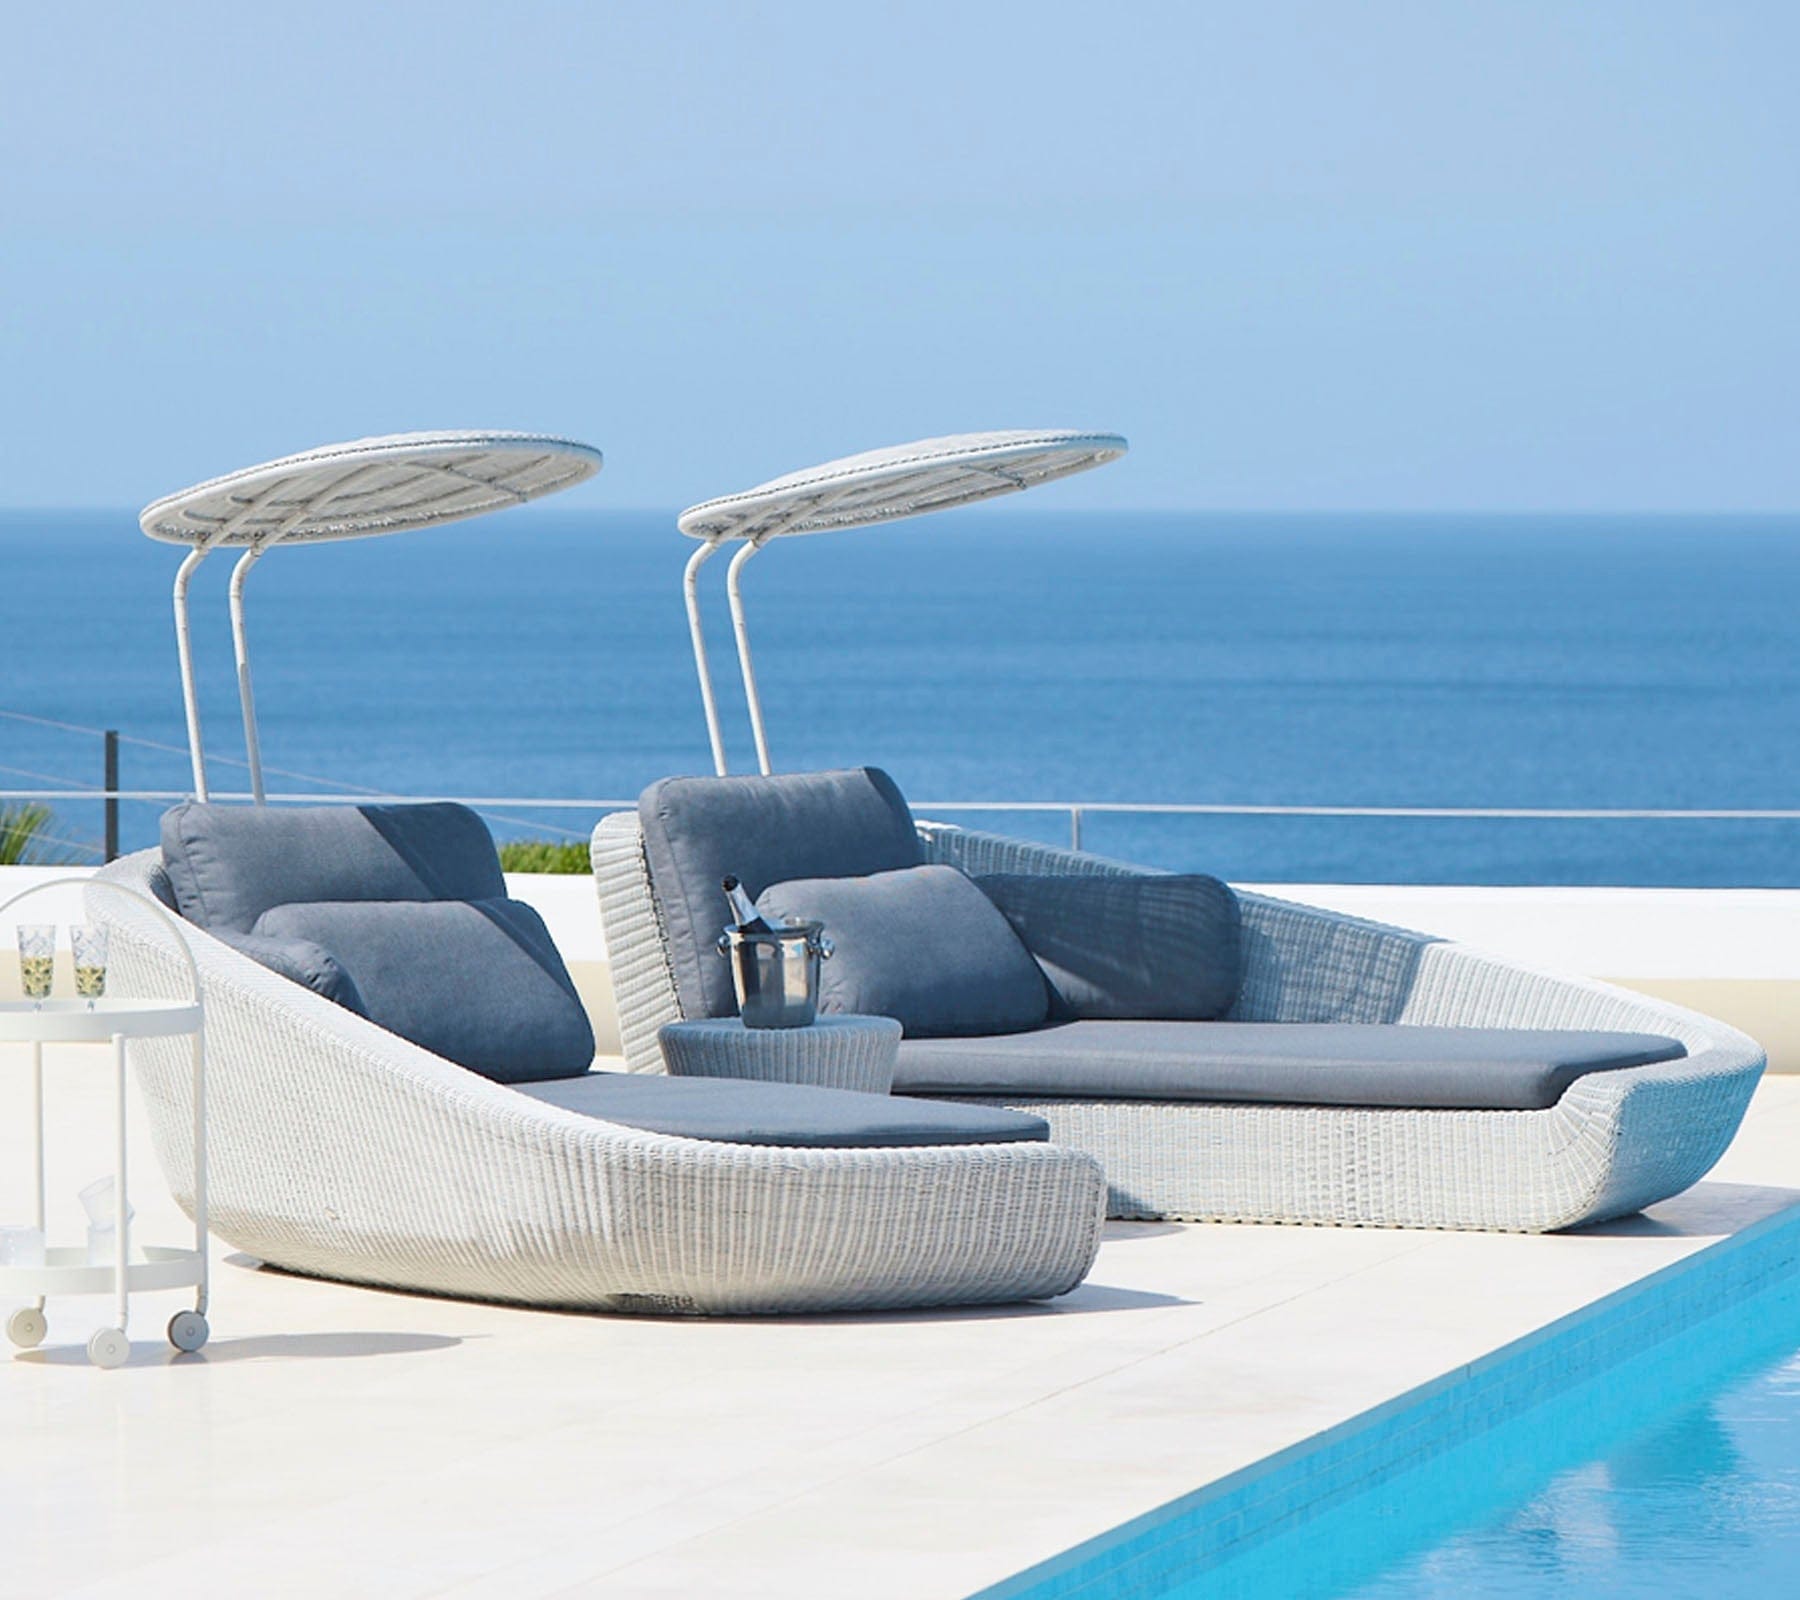 Boxhill's Savannah white grey outdoor sectional chaise lounge with shade with grey cushion set beside the pool